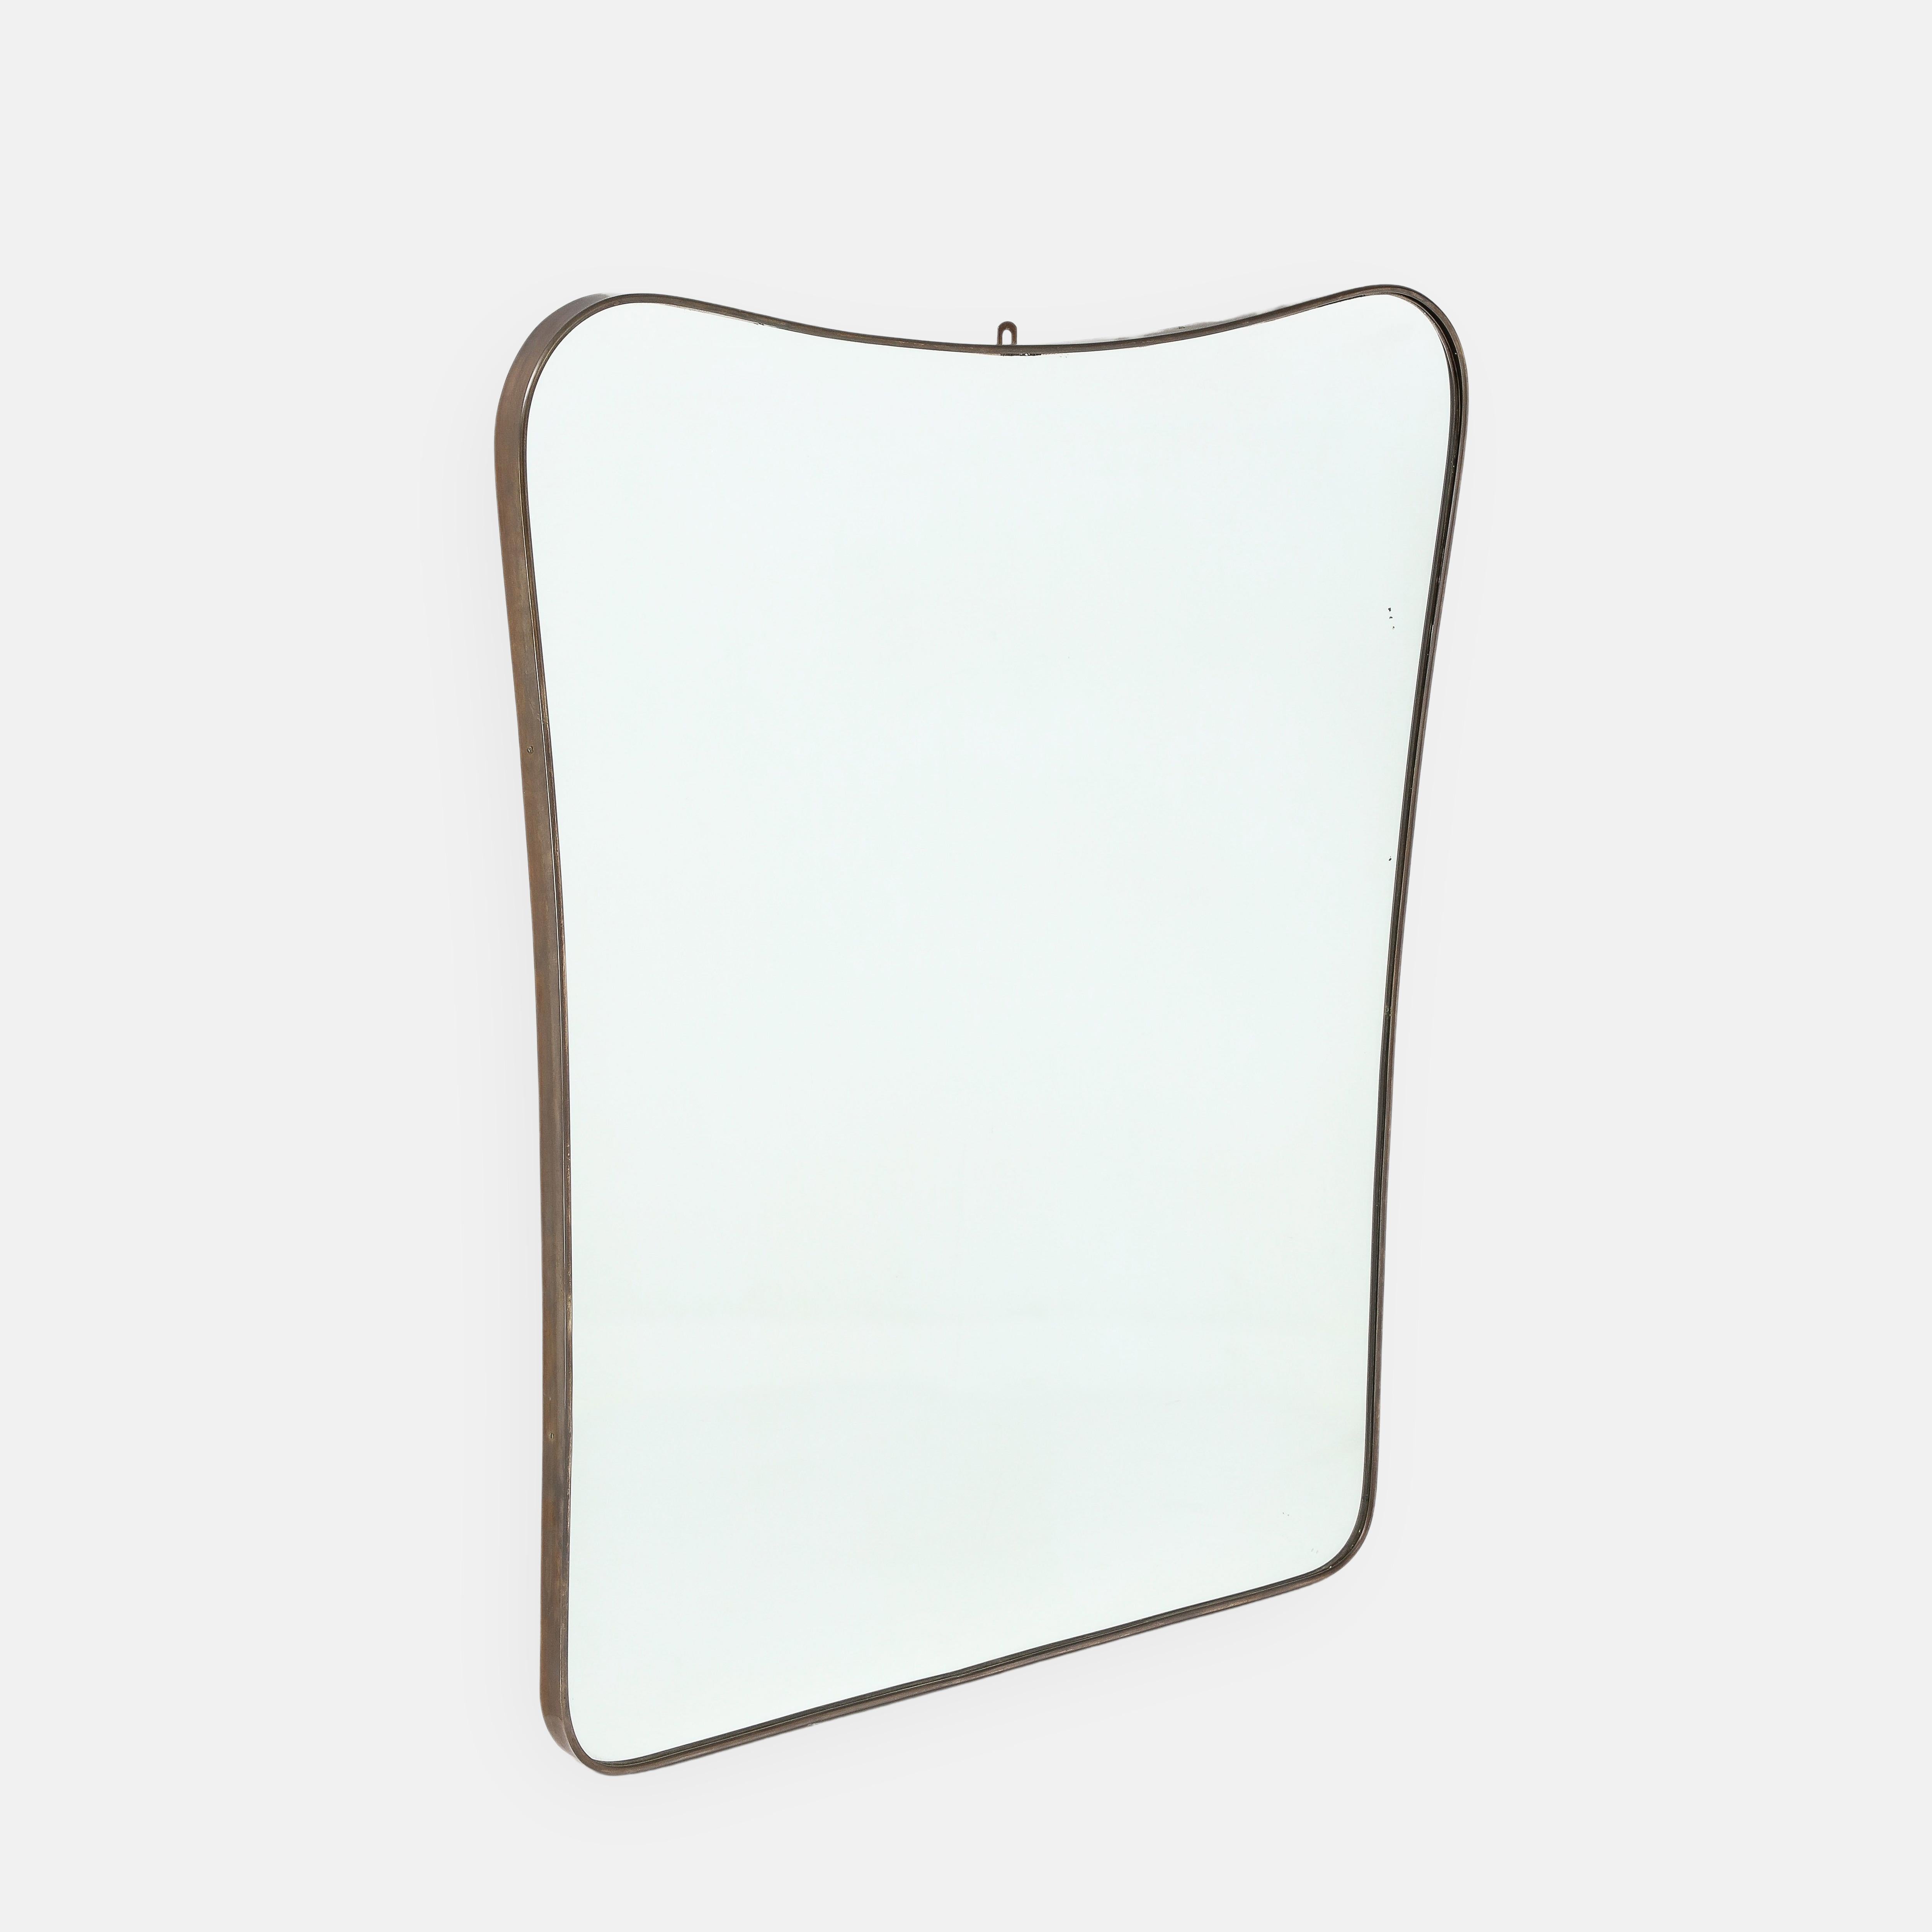 1950s Italian modernist large wall mirror consisting of shaped brass frame with gently arched top and rounded corners which tapers towards the bottom.  It's unusually wide and large in scale making a bold statement in any interior whether classic or